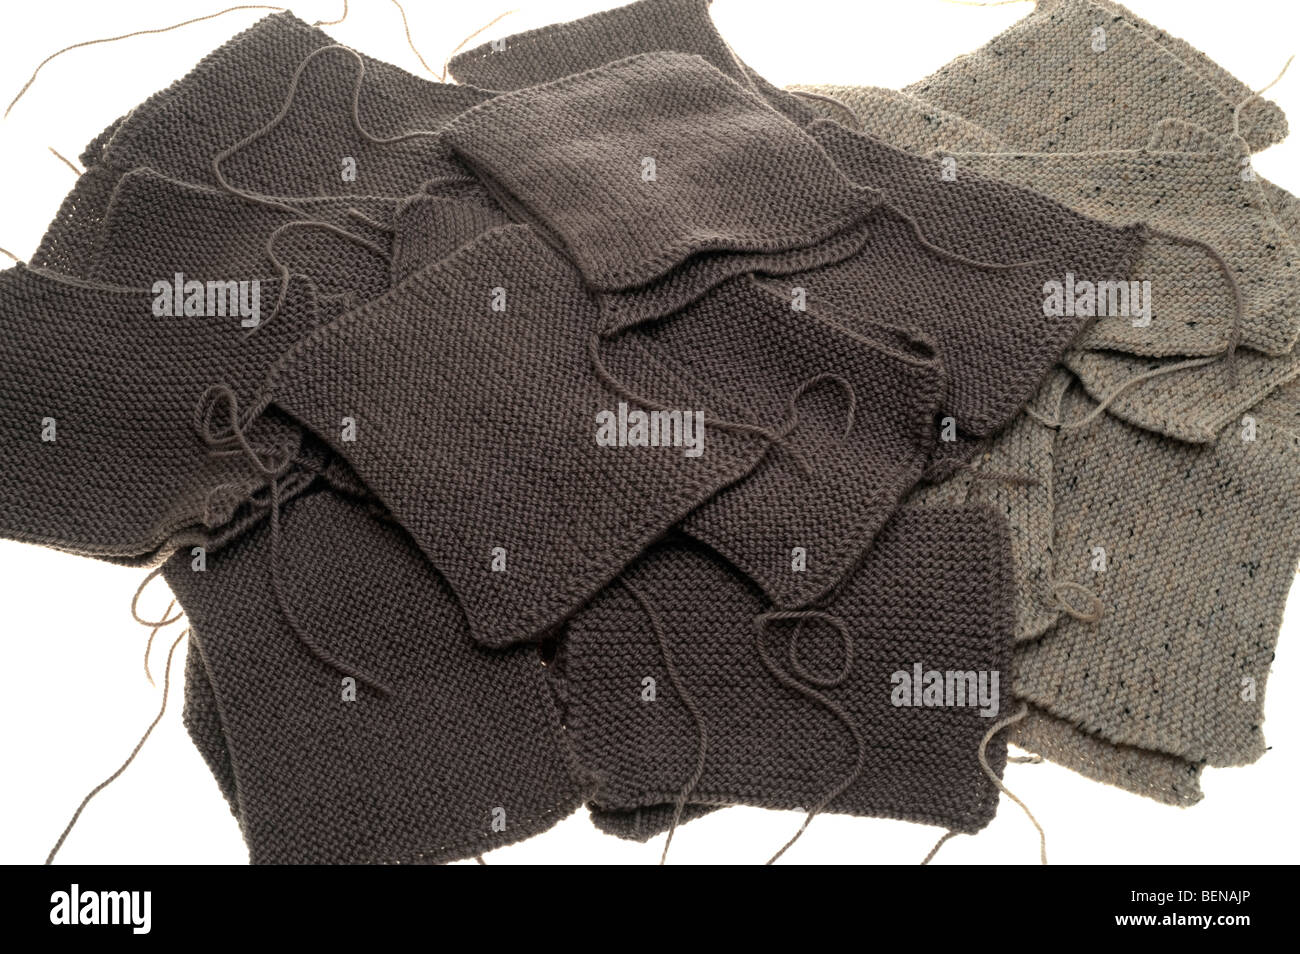 Pile of brown and beige knitted Squares Stock Photo